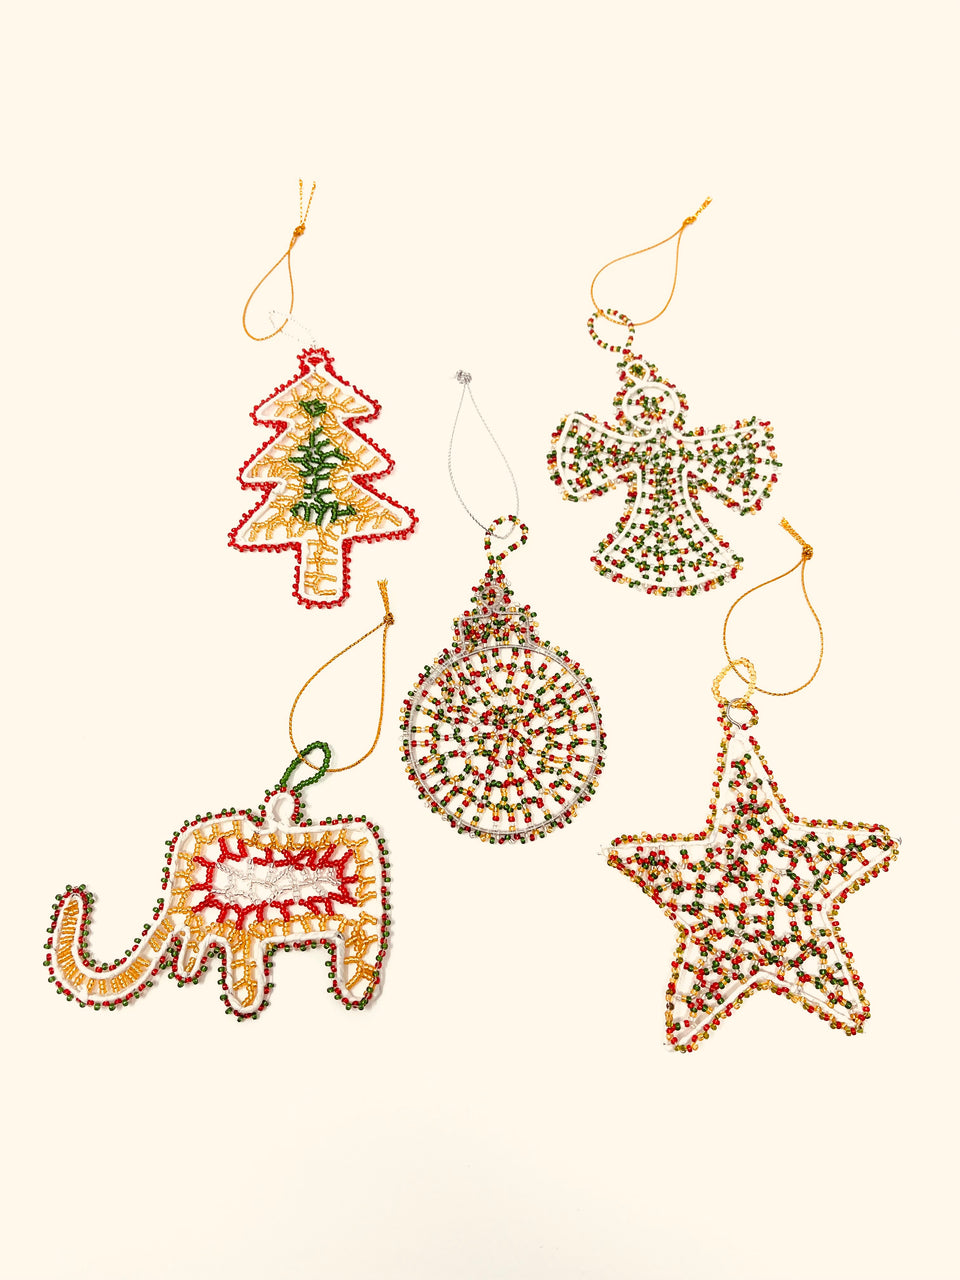 Beaded Variety Pack Christmas Ornaments (Set of 5)